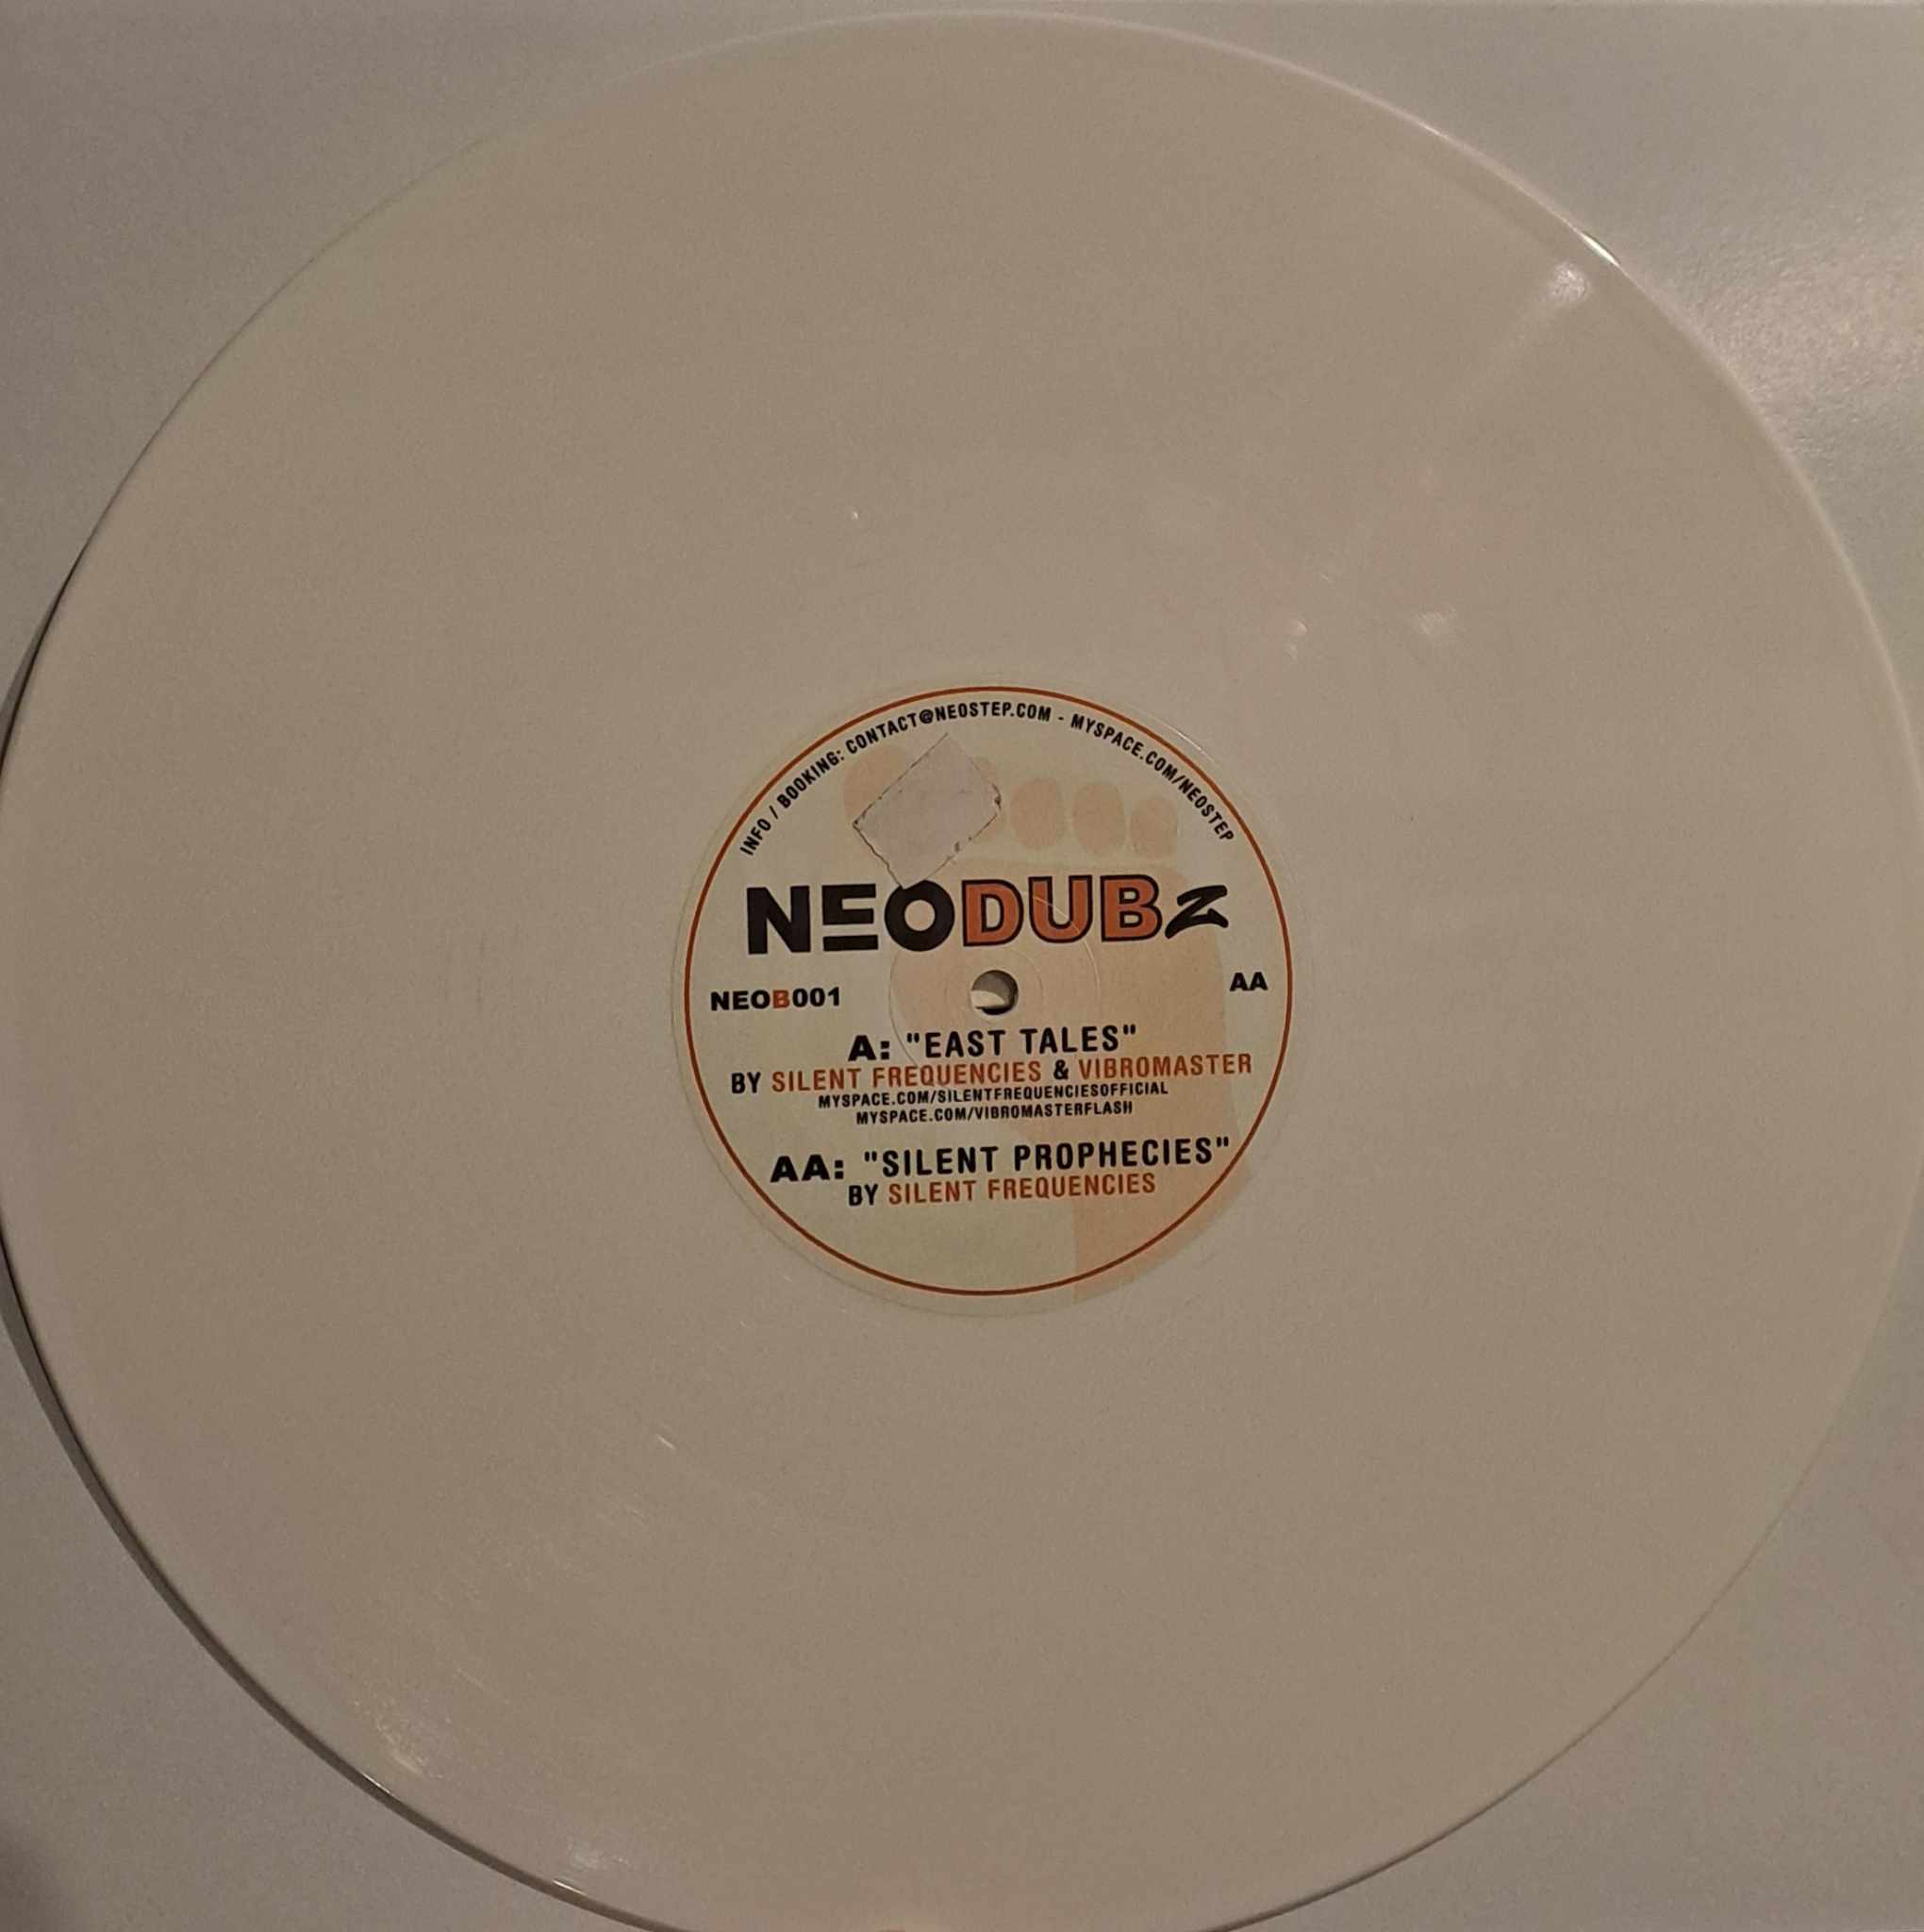 Neostep Records 001 - vinyle dubstep